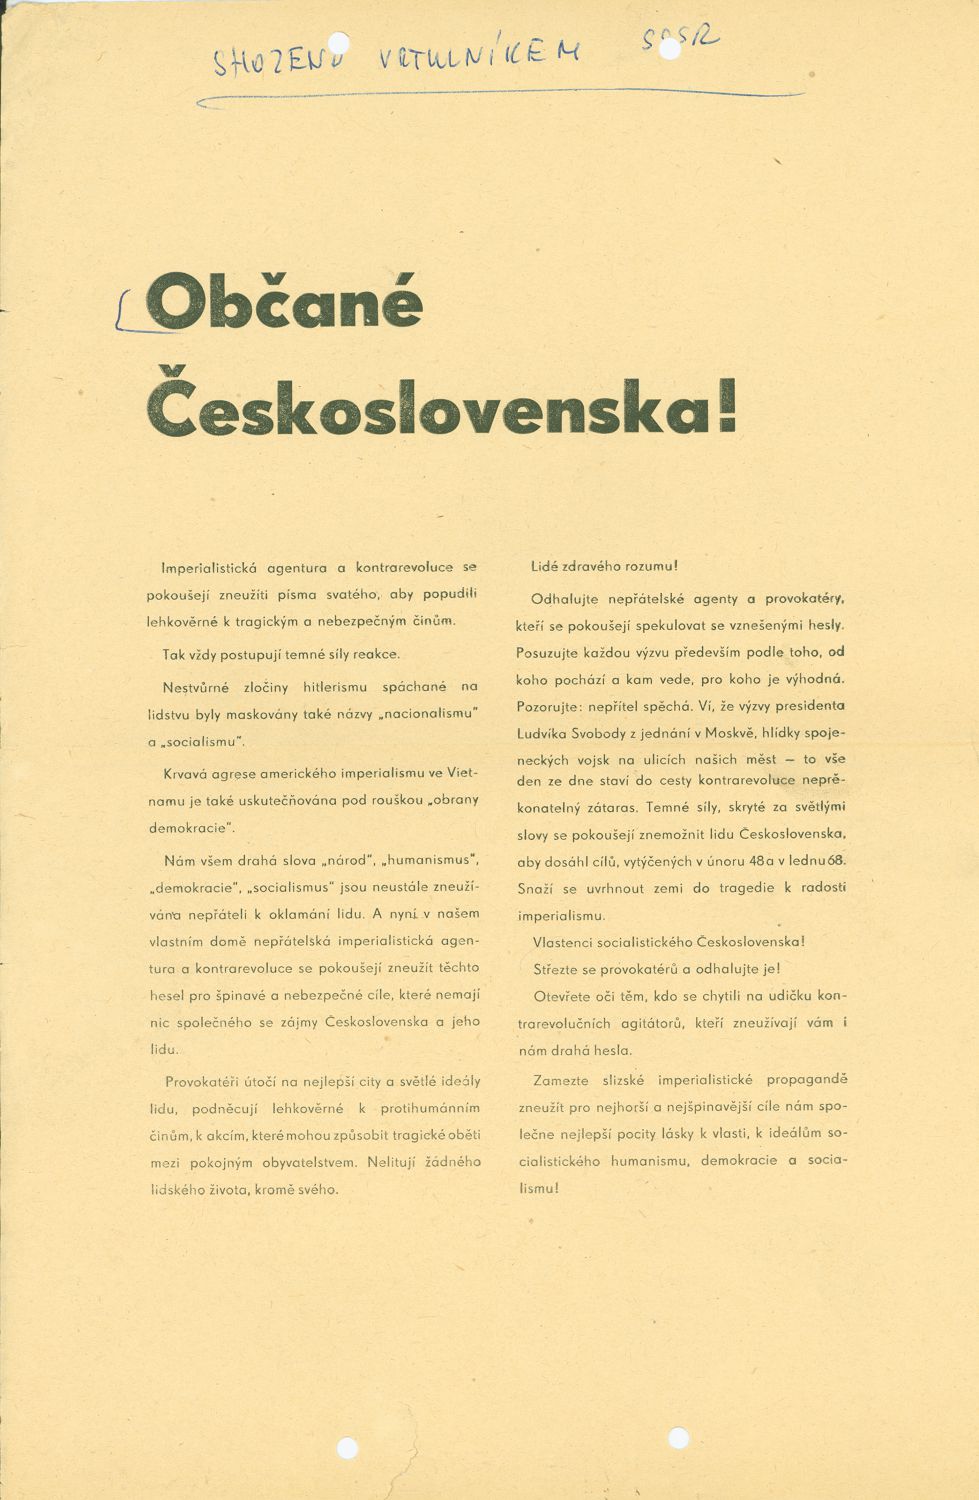 Soviet Appeal to the Citizens of Czechoslovakia Not to Fall for Counter-Revolution